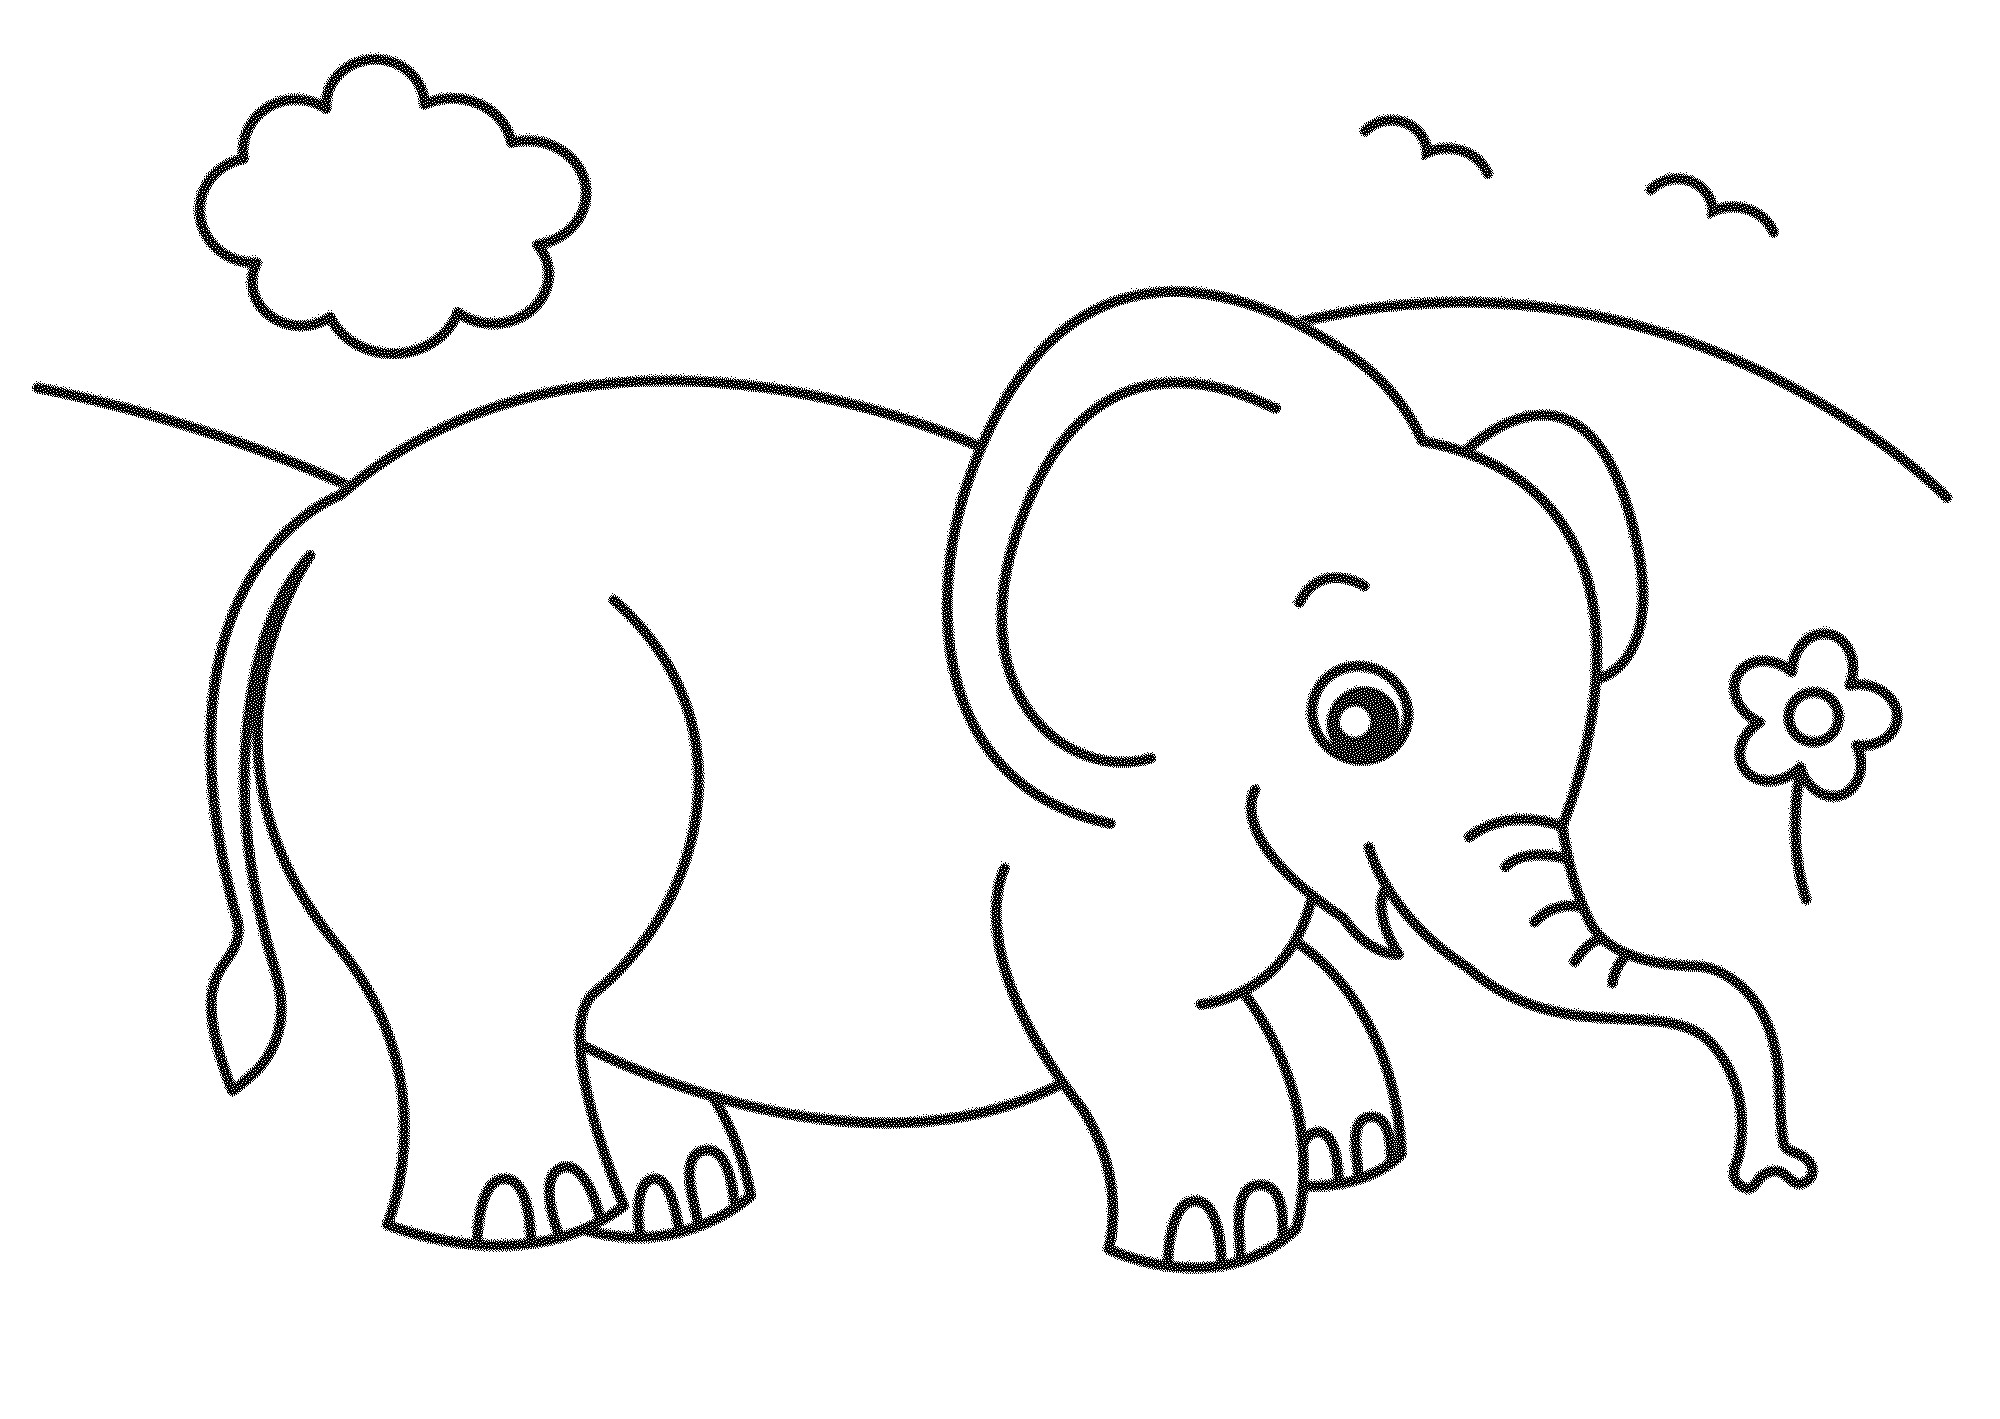 Elephant Coloring Pages For Kids
 Print & Download Teaching Kids through Elephant Coloring